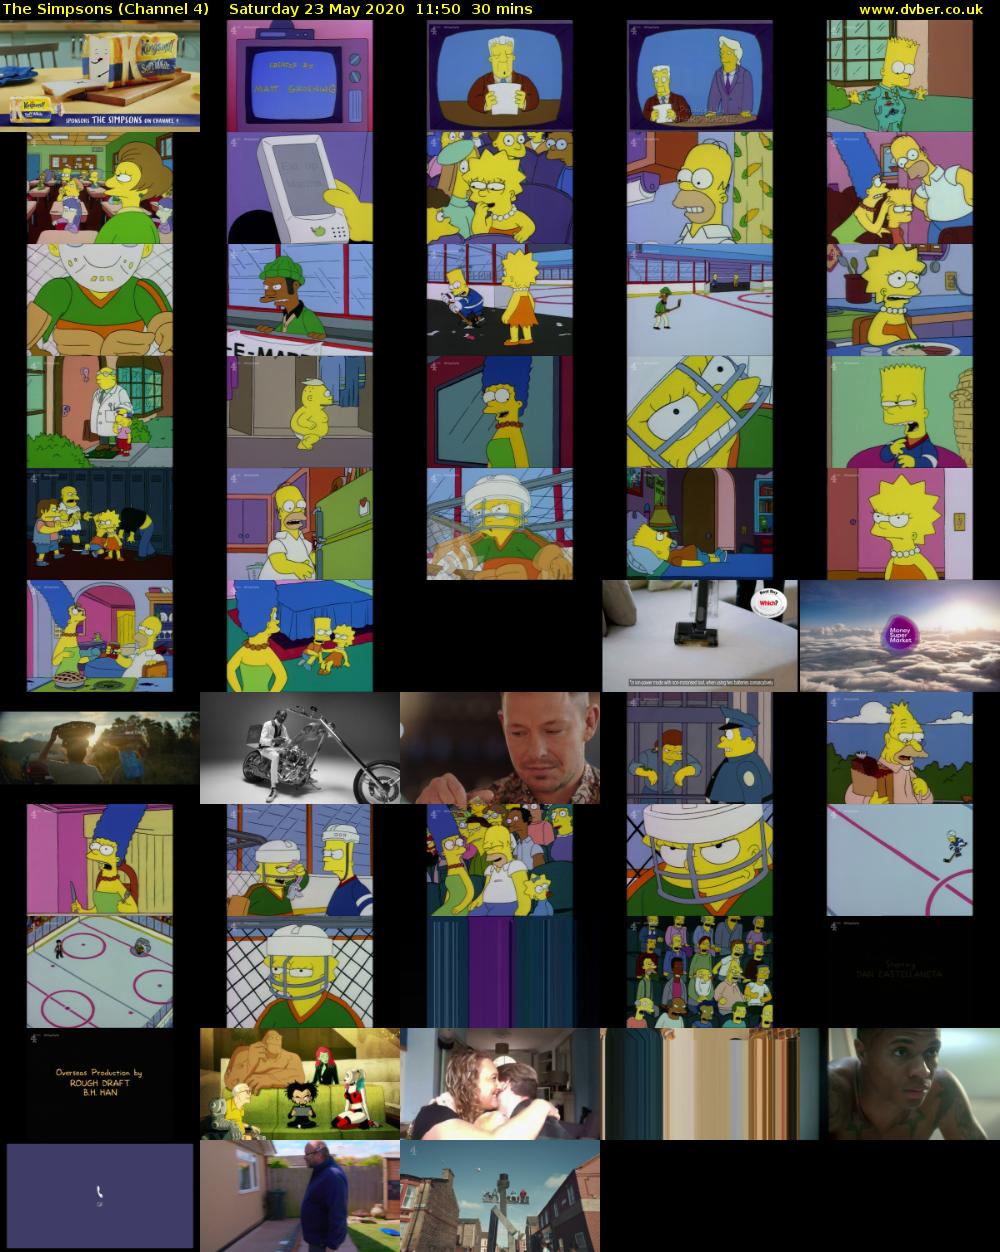 The Simpsons (Channel 4) Saturday 23 May 2020 11:50 - 12:20